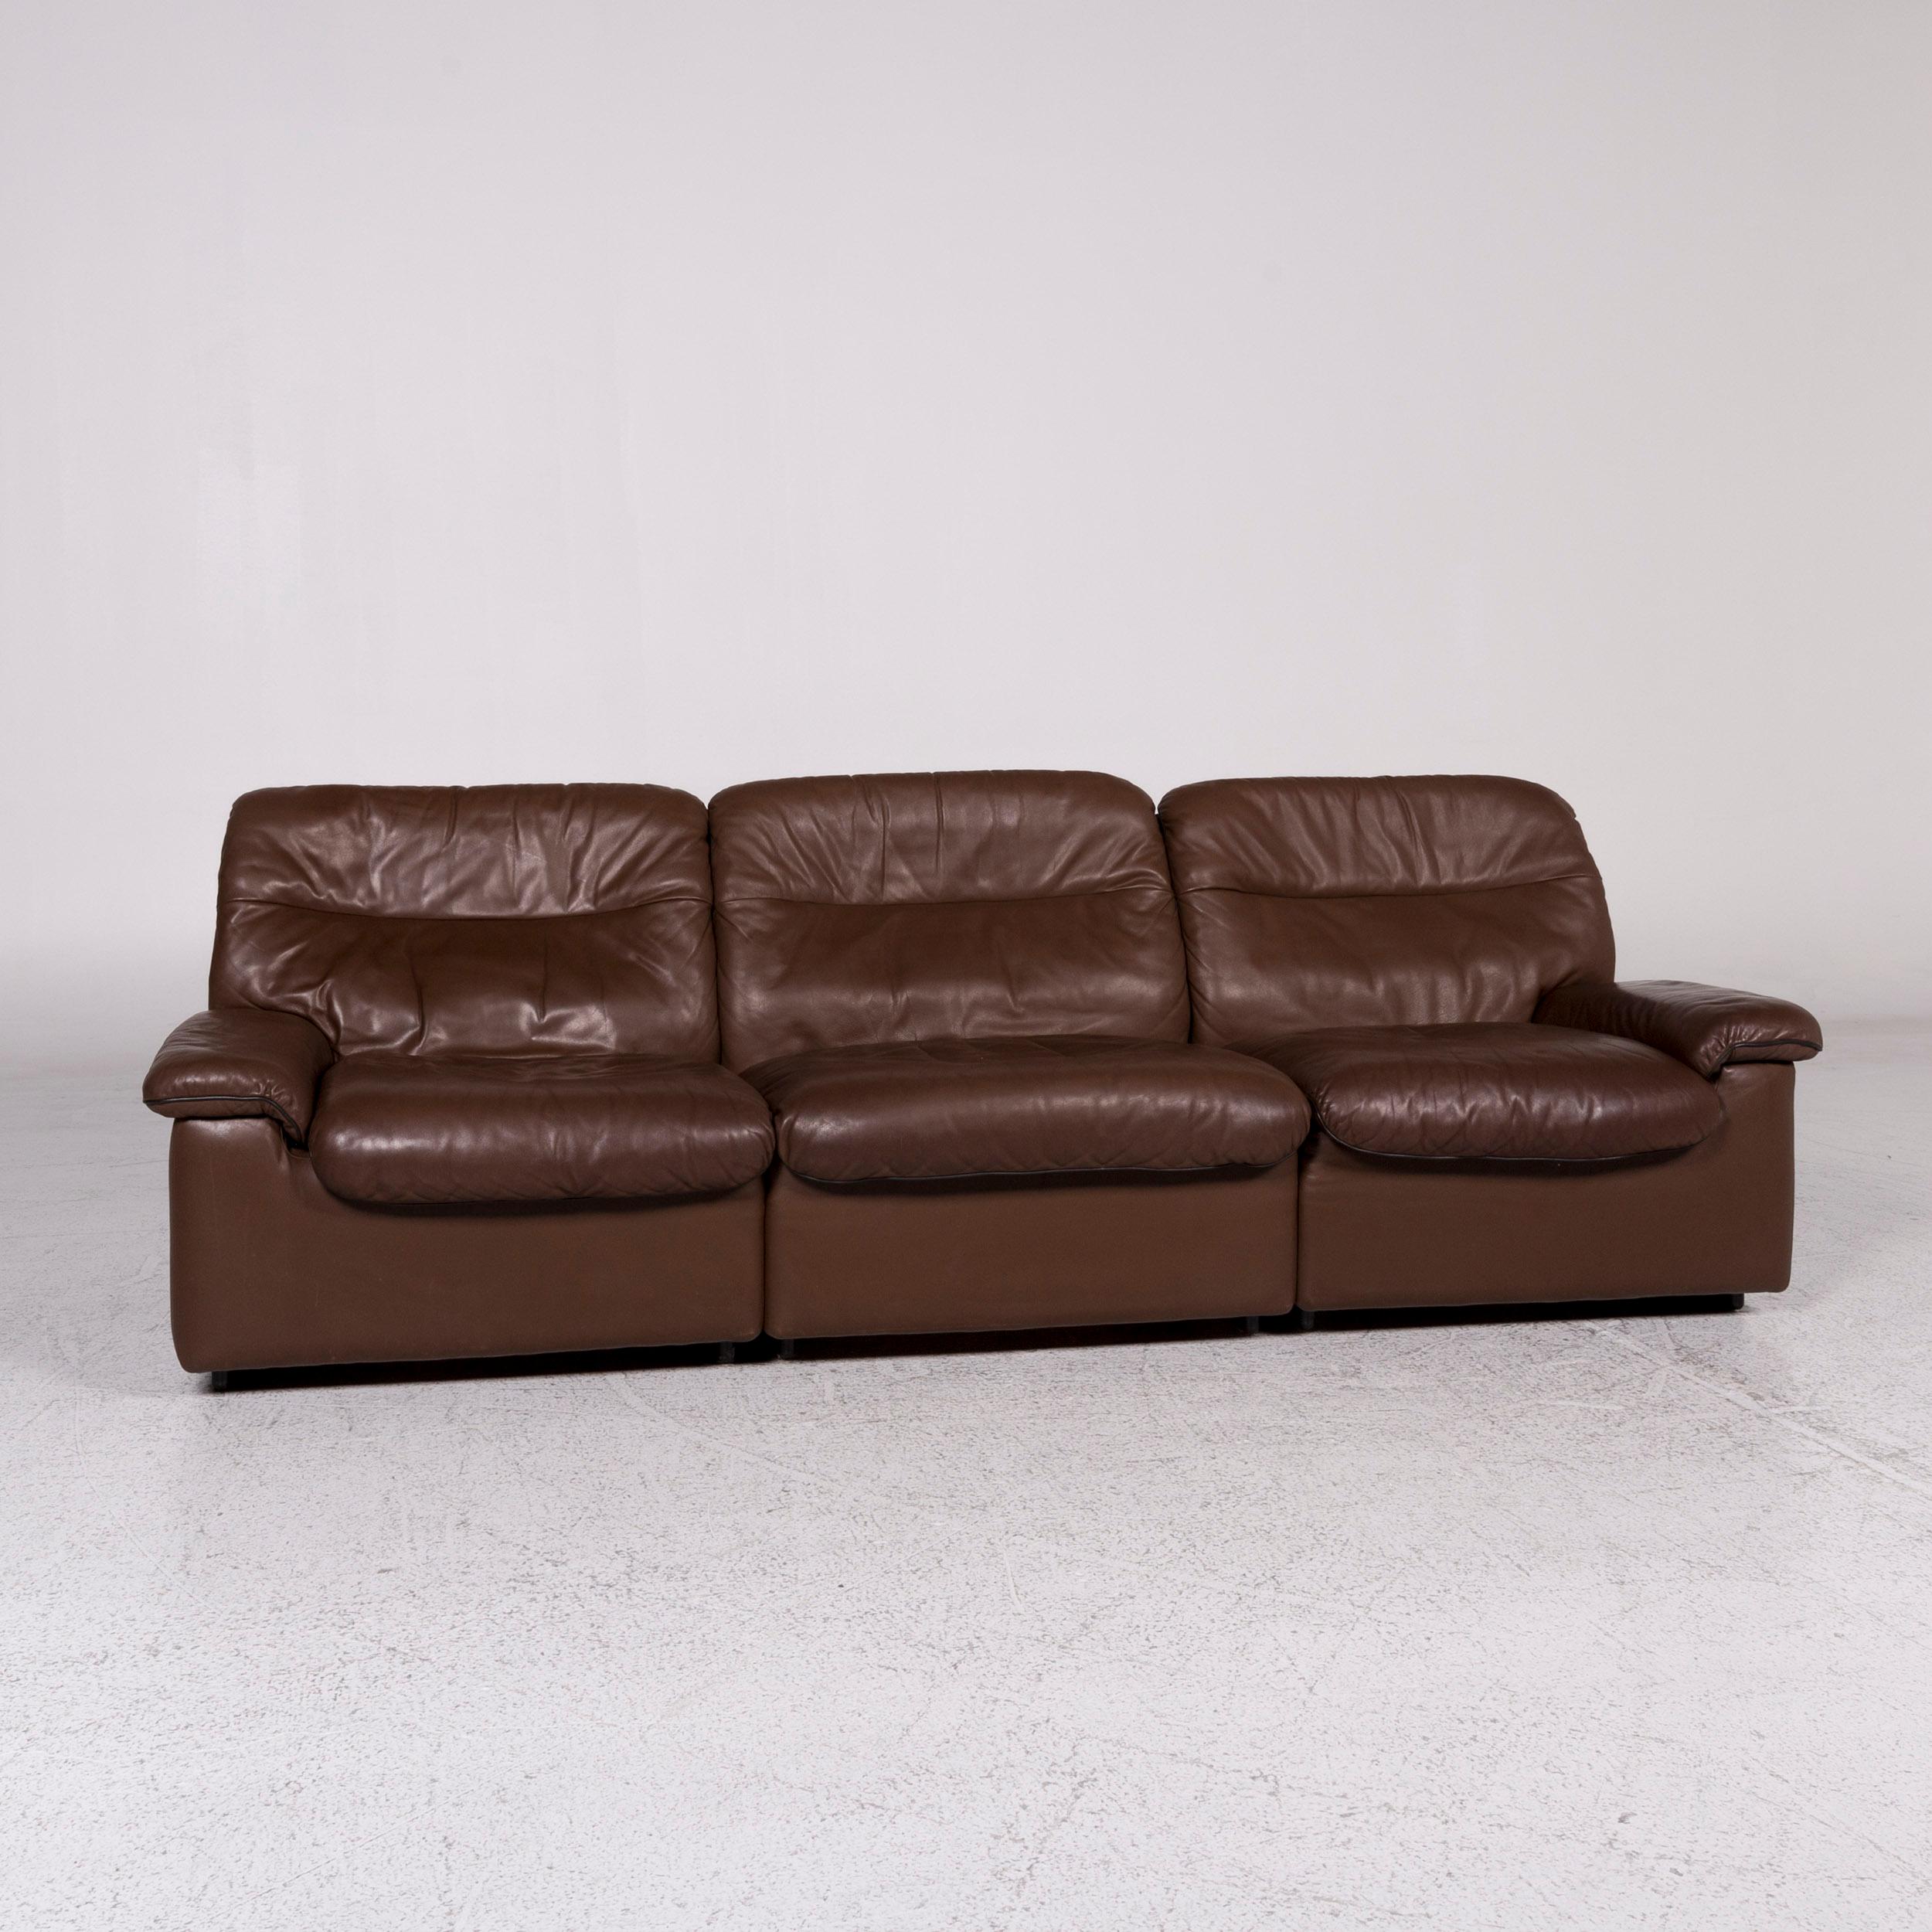 We bring to you a De Sede leather sofa brown three-seat couch.

Product measurements in centimeters:

Depth 89
Width 238
Height 78
Seat-height 41
Rest-height 46
Seat-depth 57
Seat-width 199
Back-height 37.
 